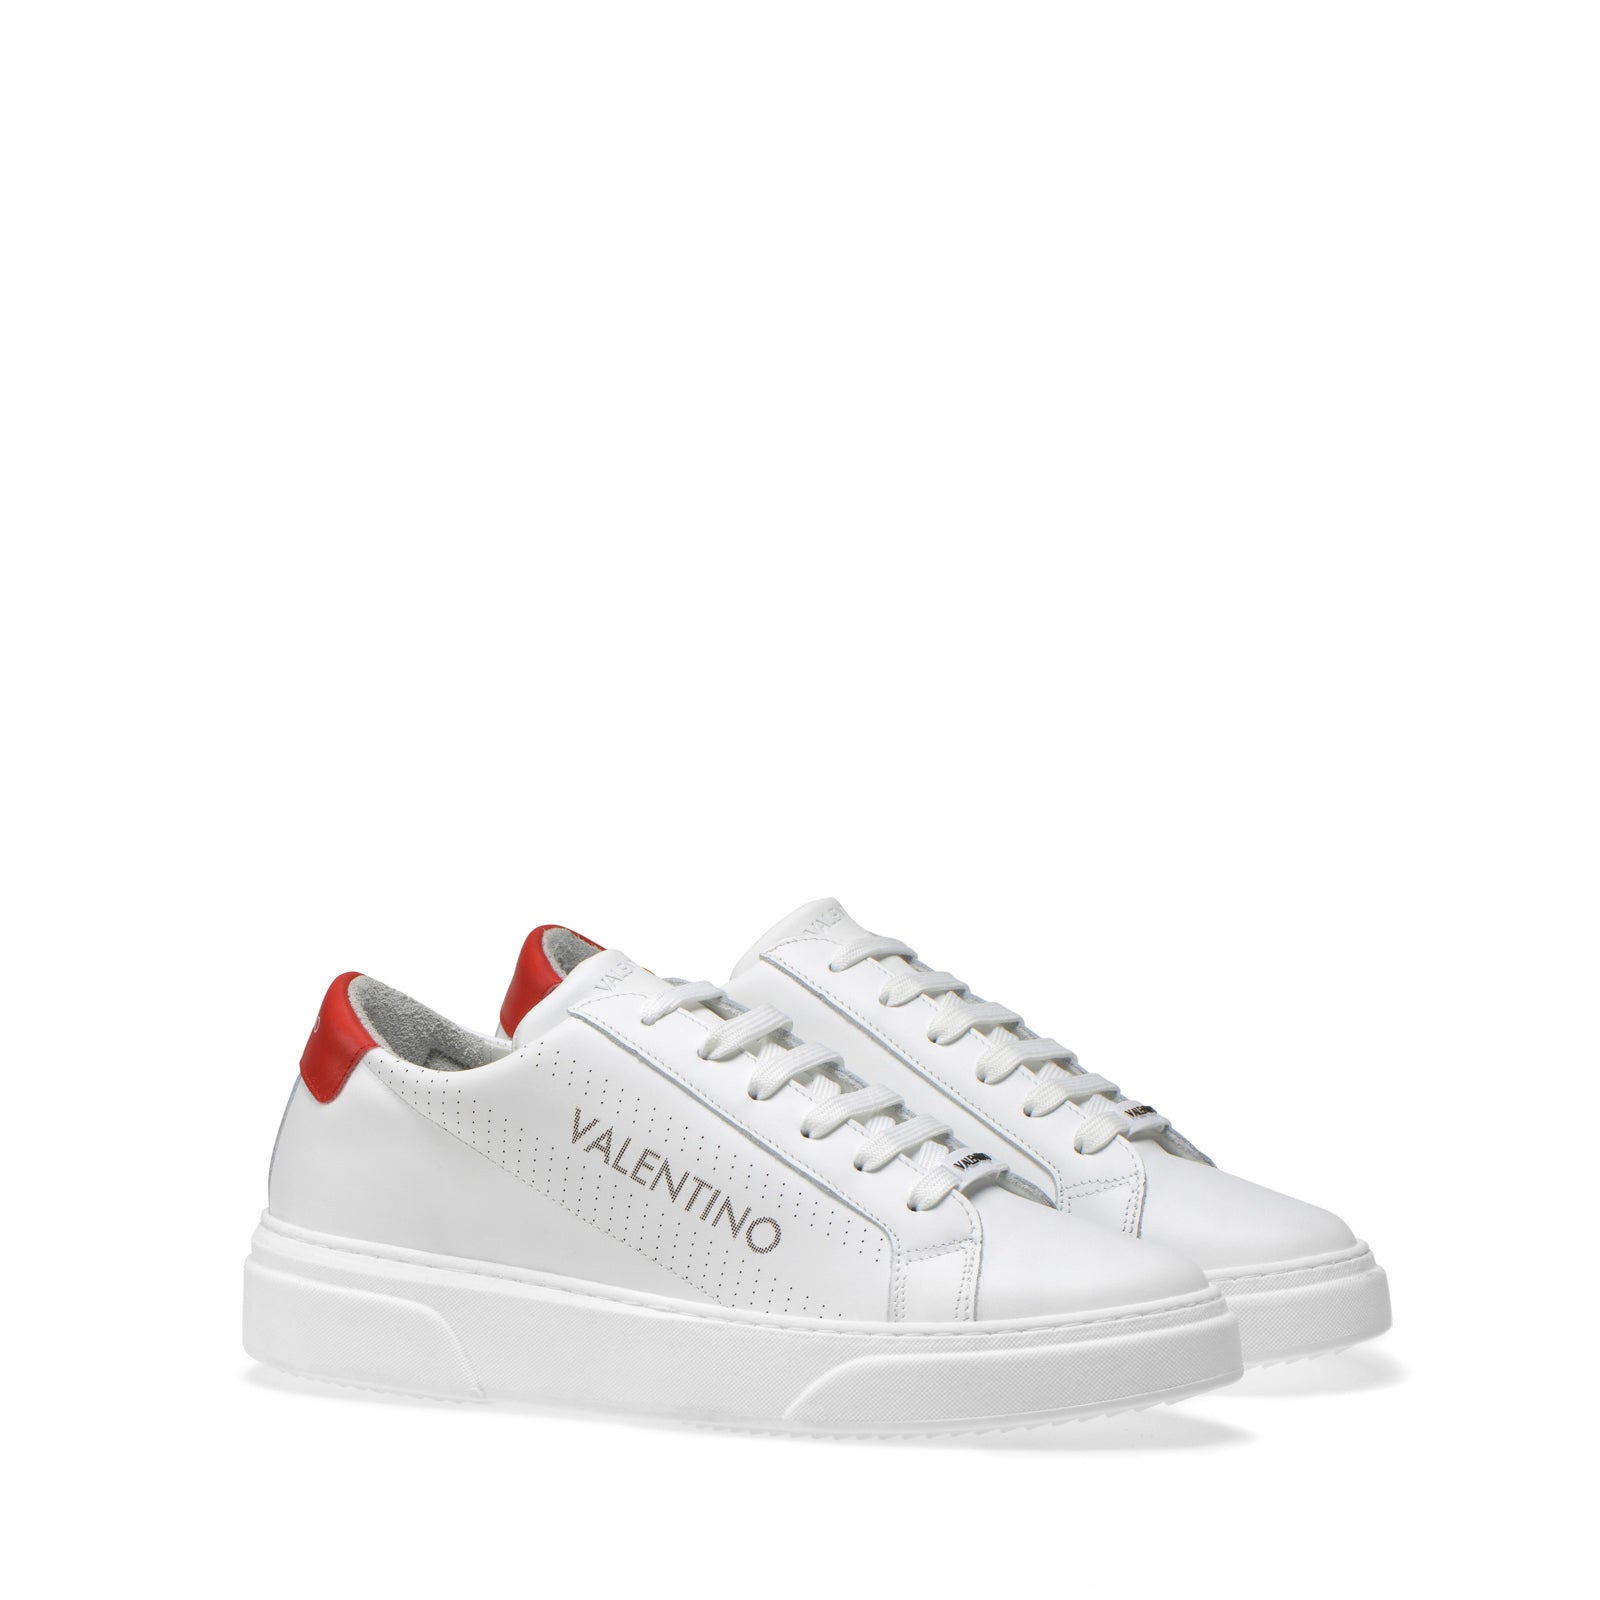 Valentino Sneakers for Men in White Calf Detail on the Heel Valentino UAE